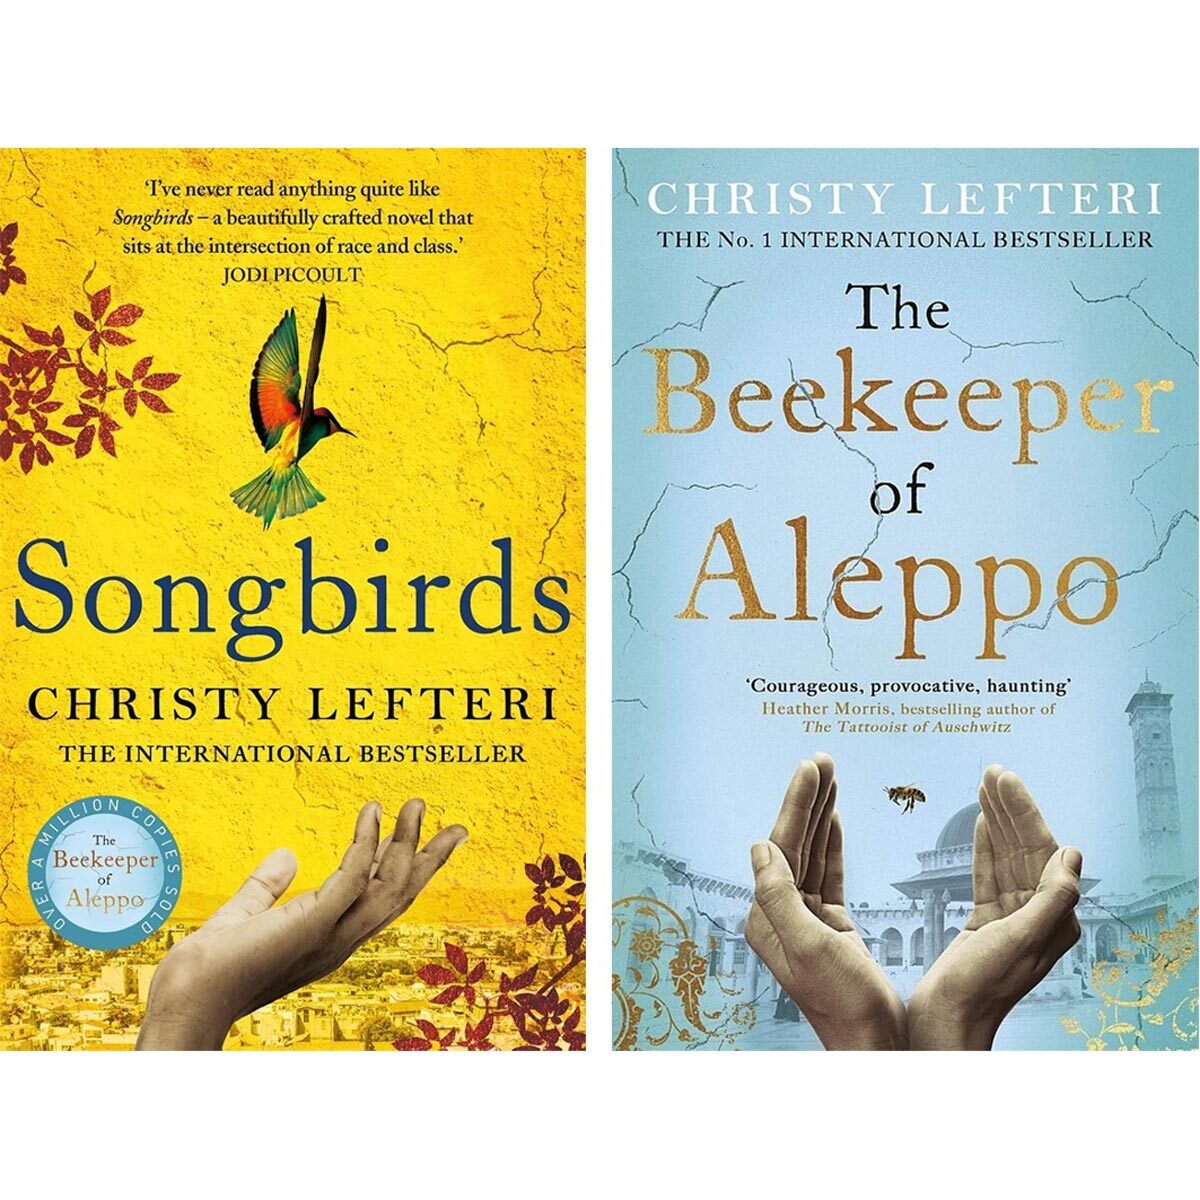 Front cover images of Christy Lefteri Songbirds and Beekeeper of Aleppo